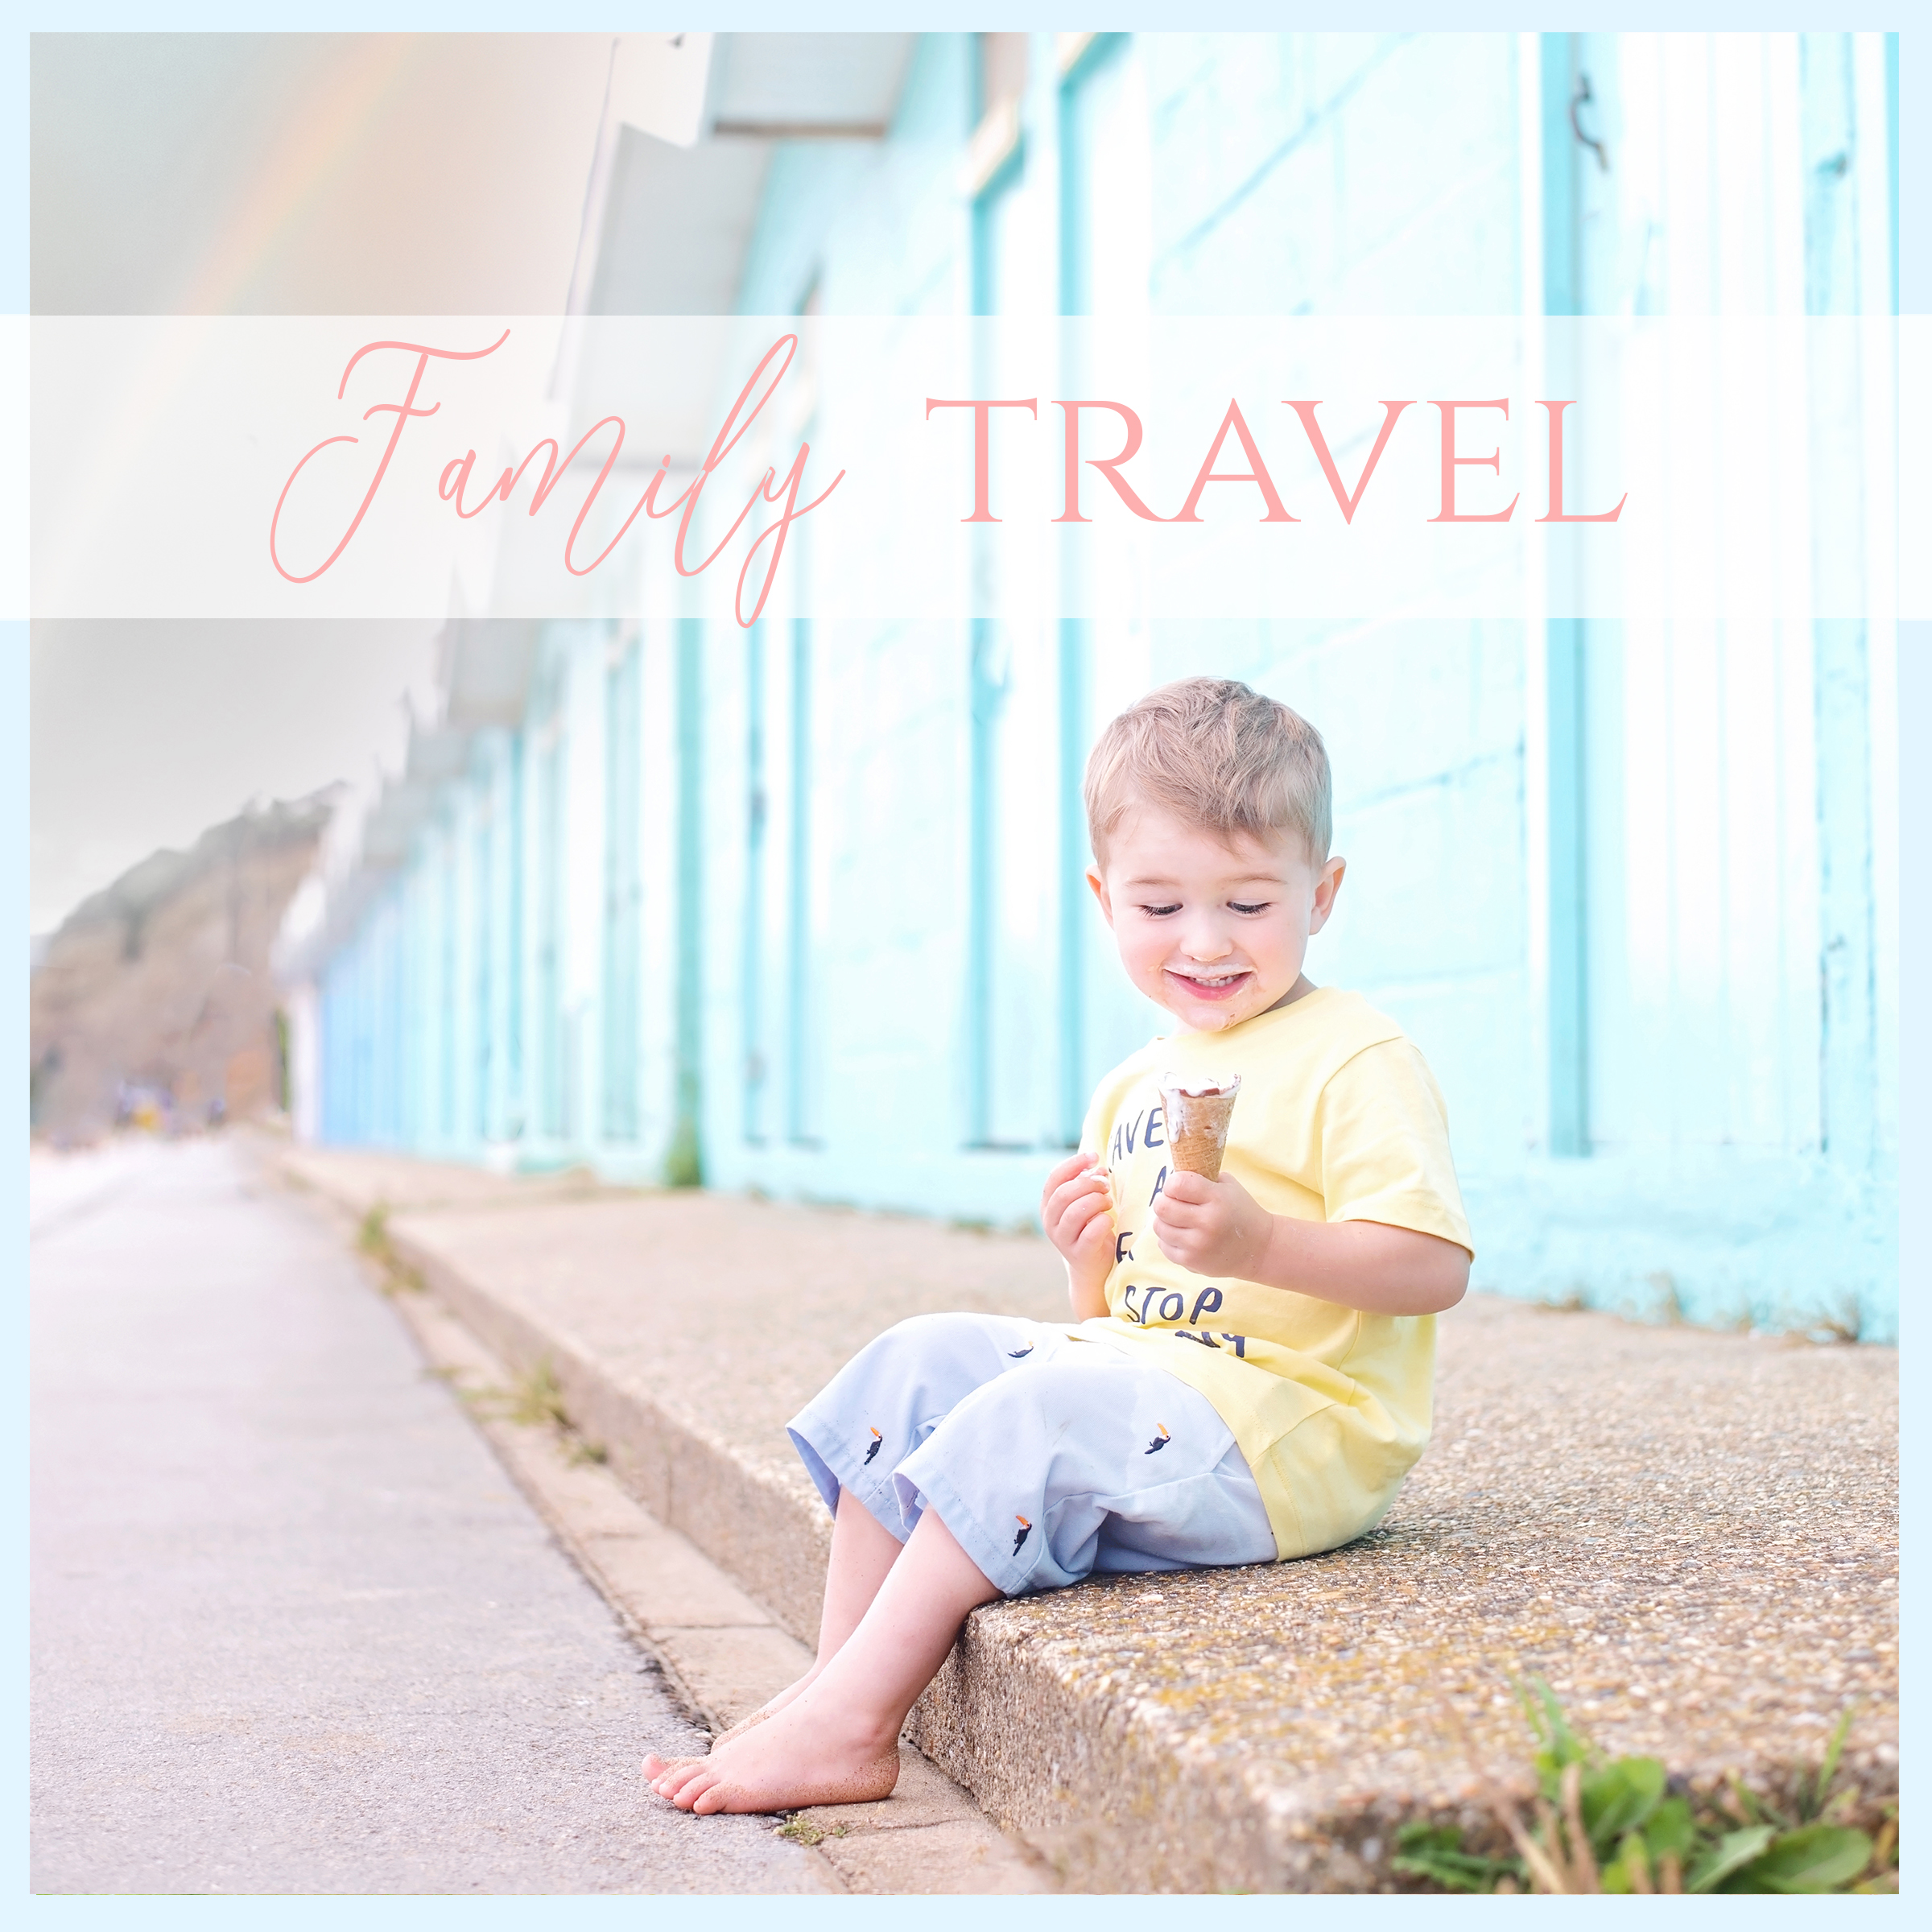 How to Prepare Your Kids for New Travel Experiences